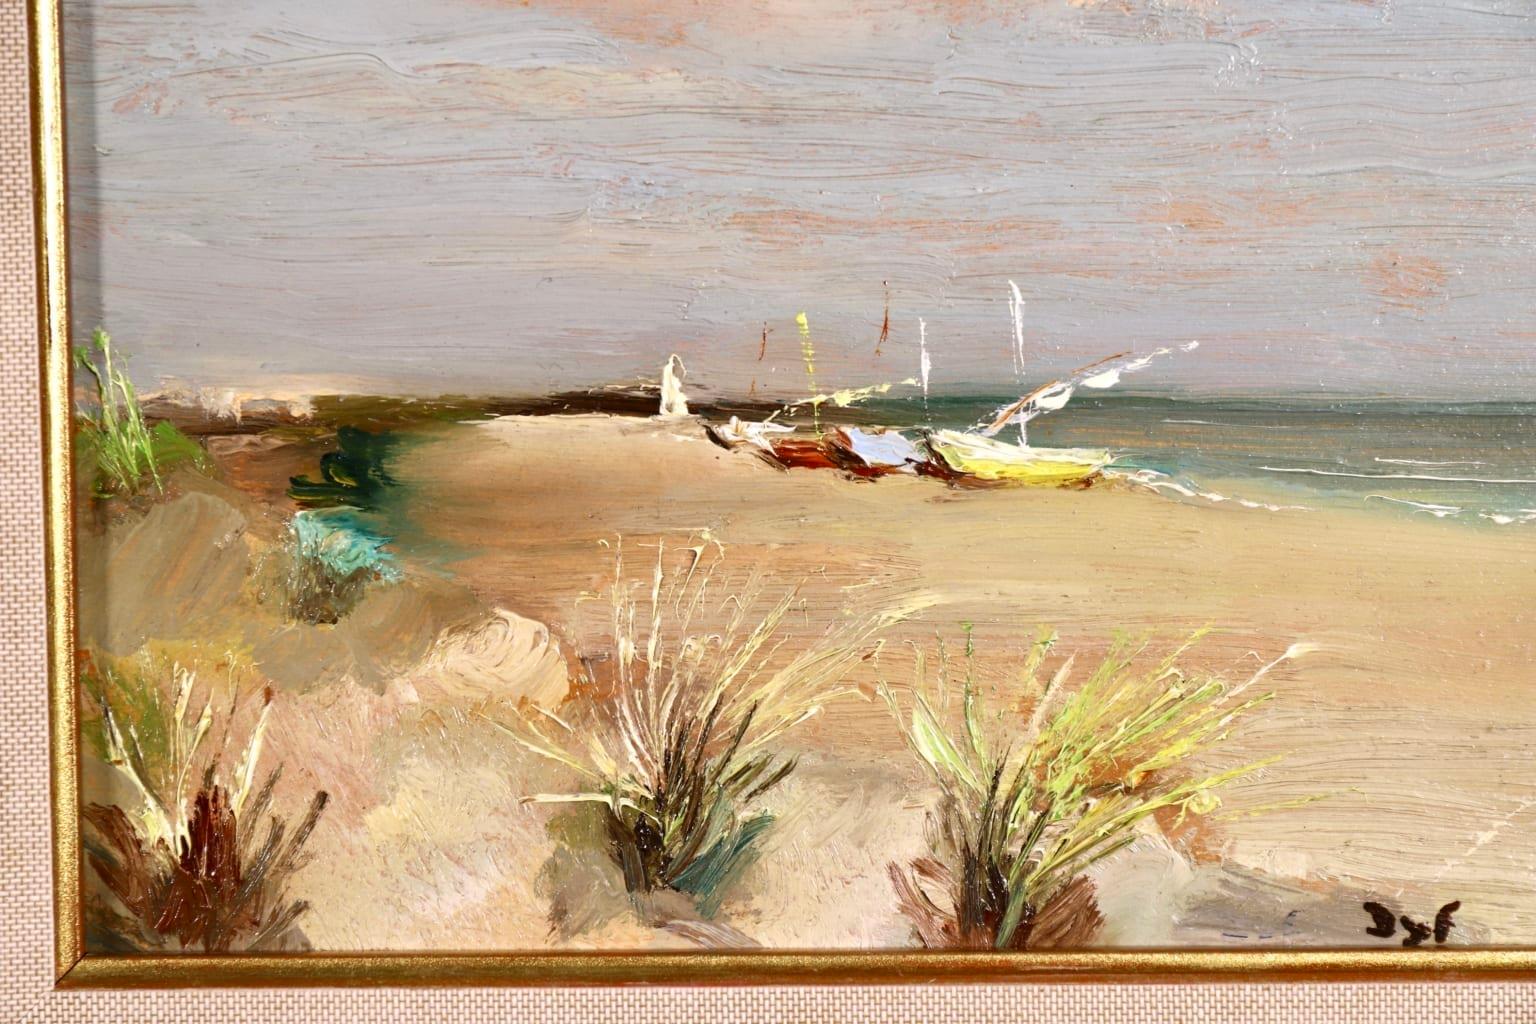 A wonderful oil on canvas by sought after French post impressionist painter Marcel Dyf depicting a view of the beach form the sand dunes at Les Saintes Maries de la Mer in Camargue in the South of France. A yellow and a brown fishing boat are